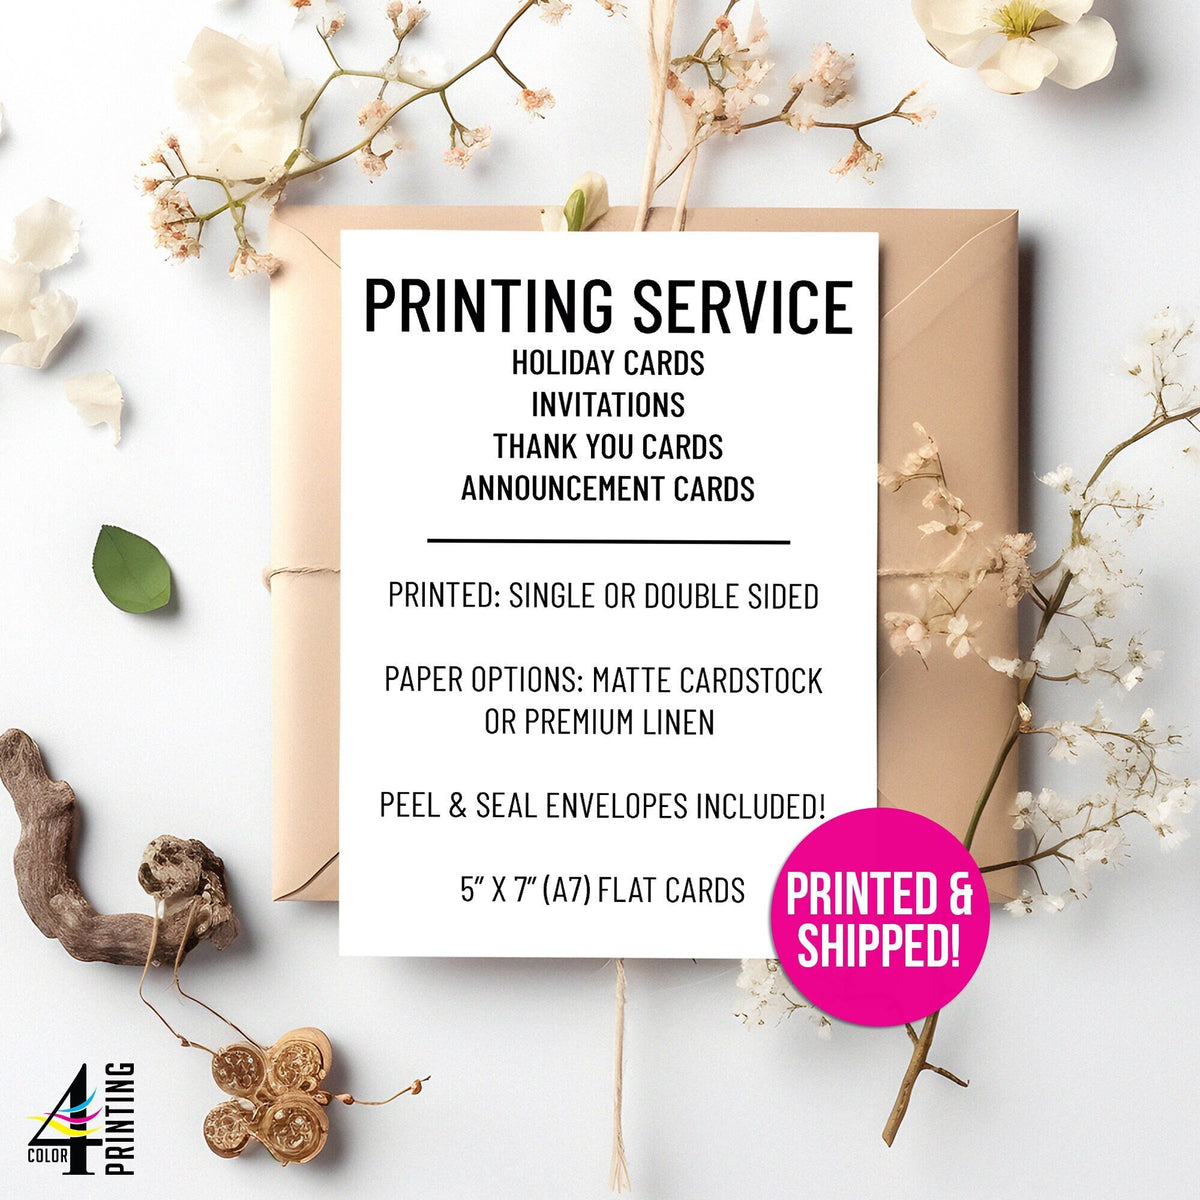 Printing Services for 5x7 Cards